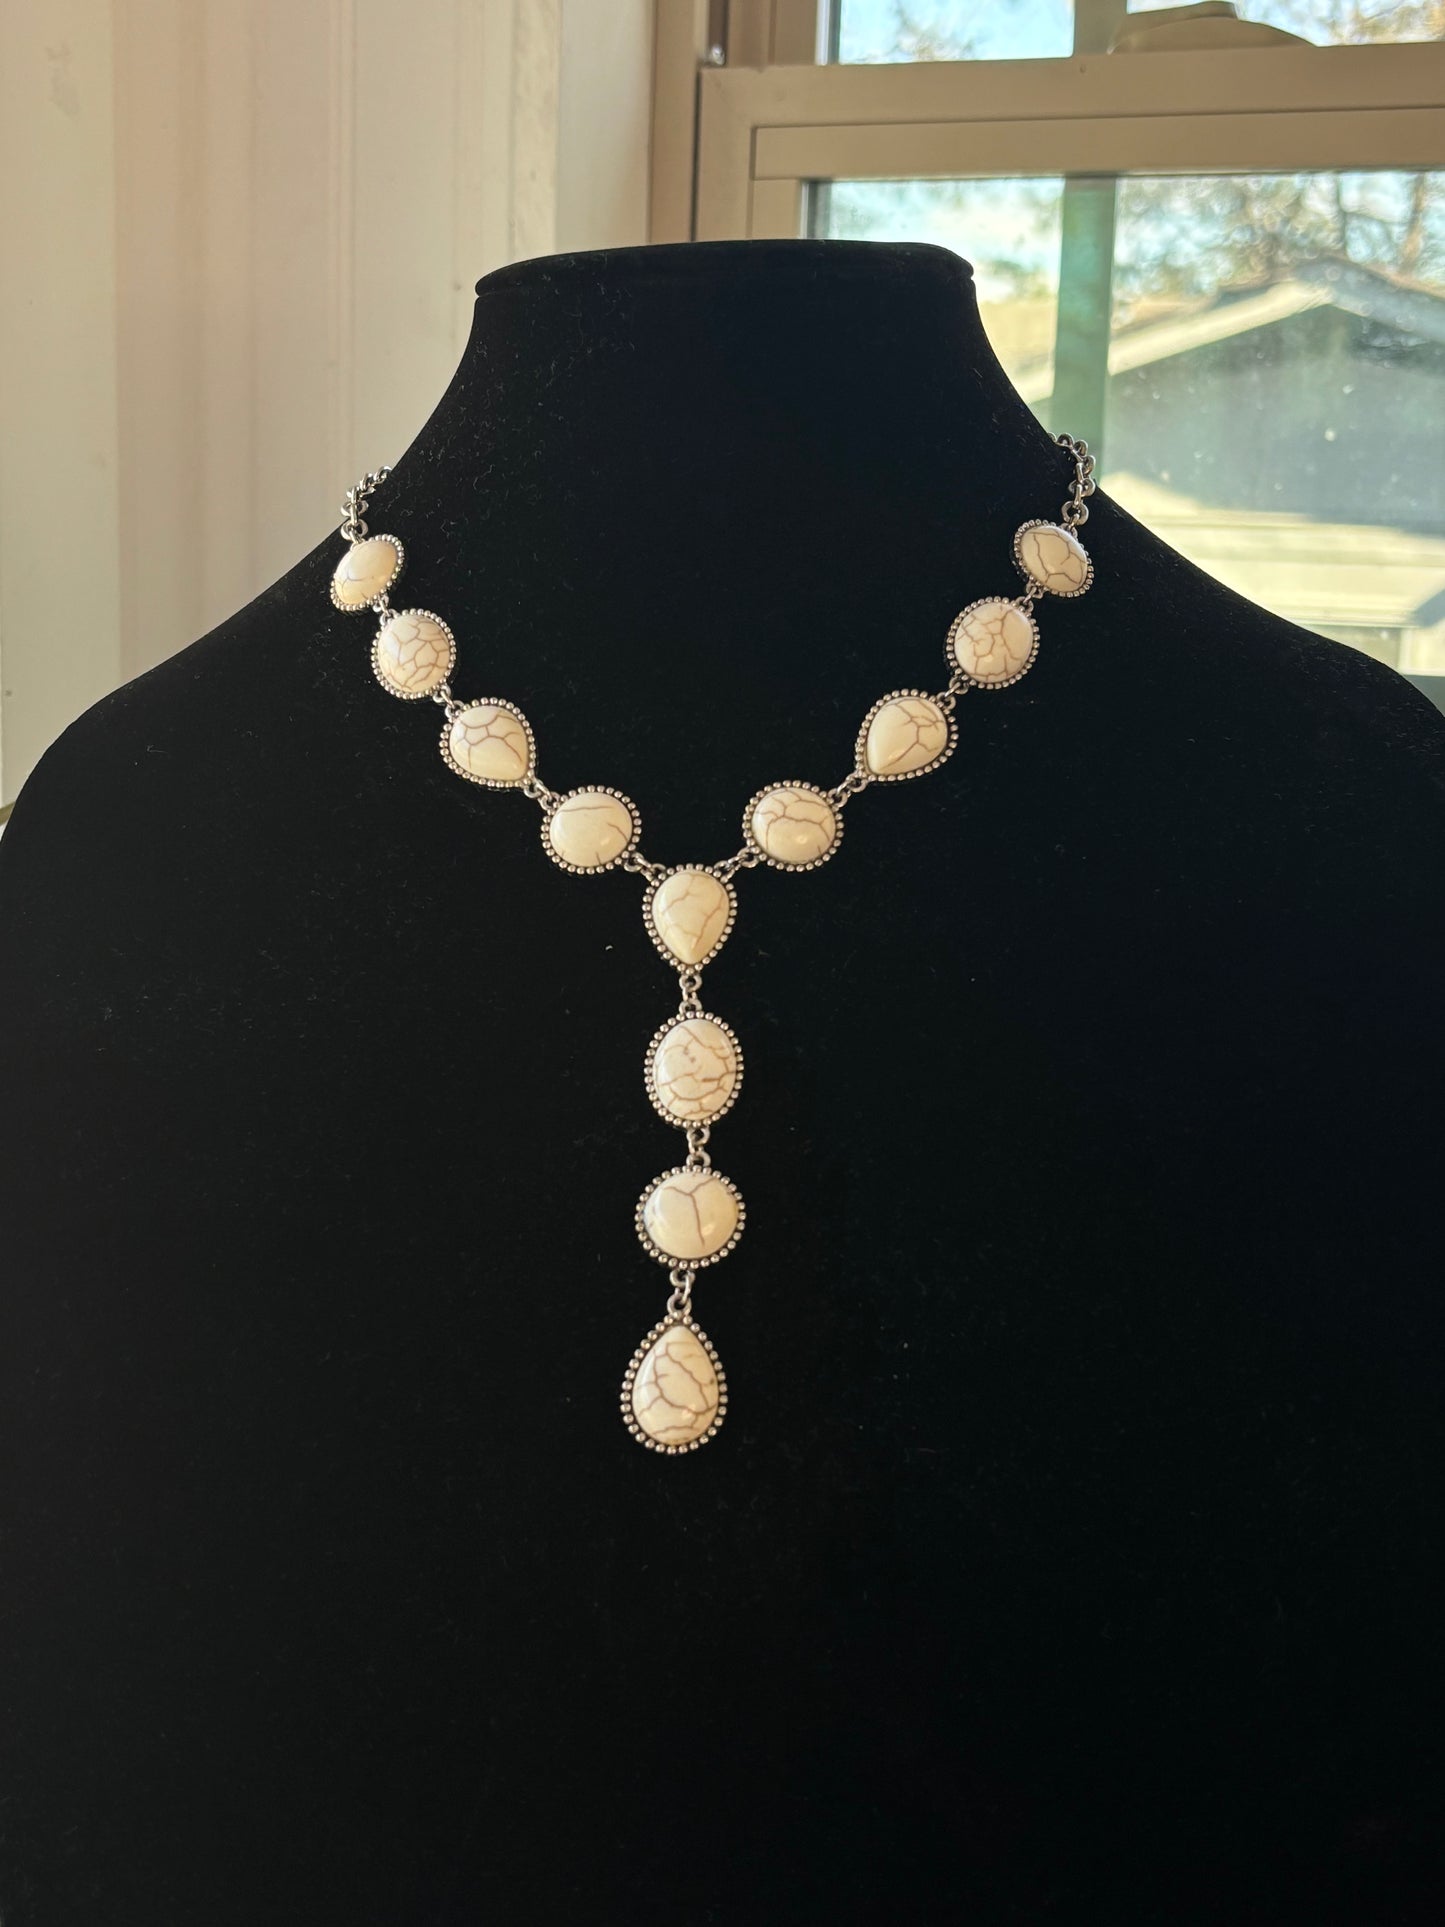 White Teardrops & Disks Necklace